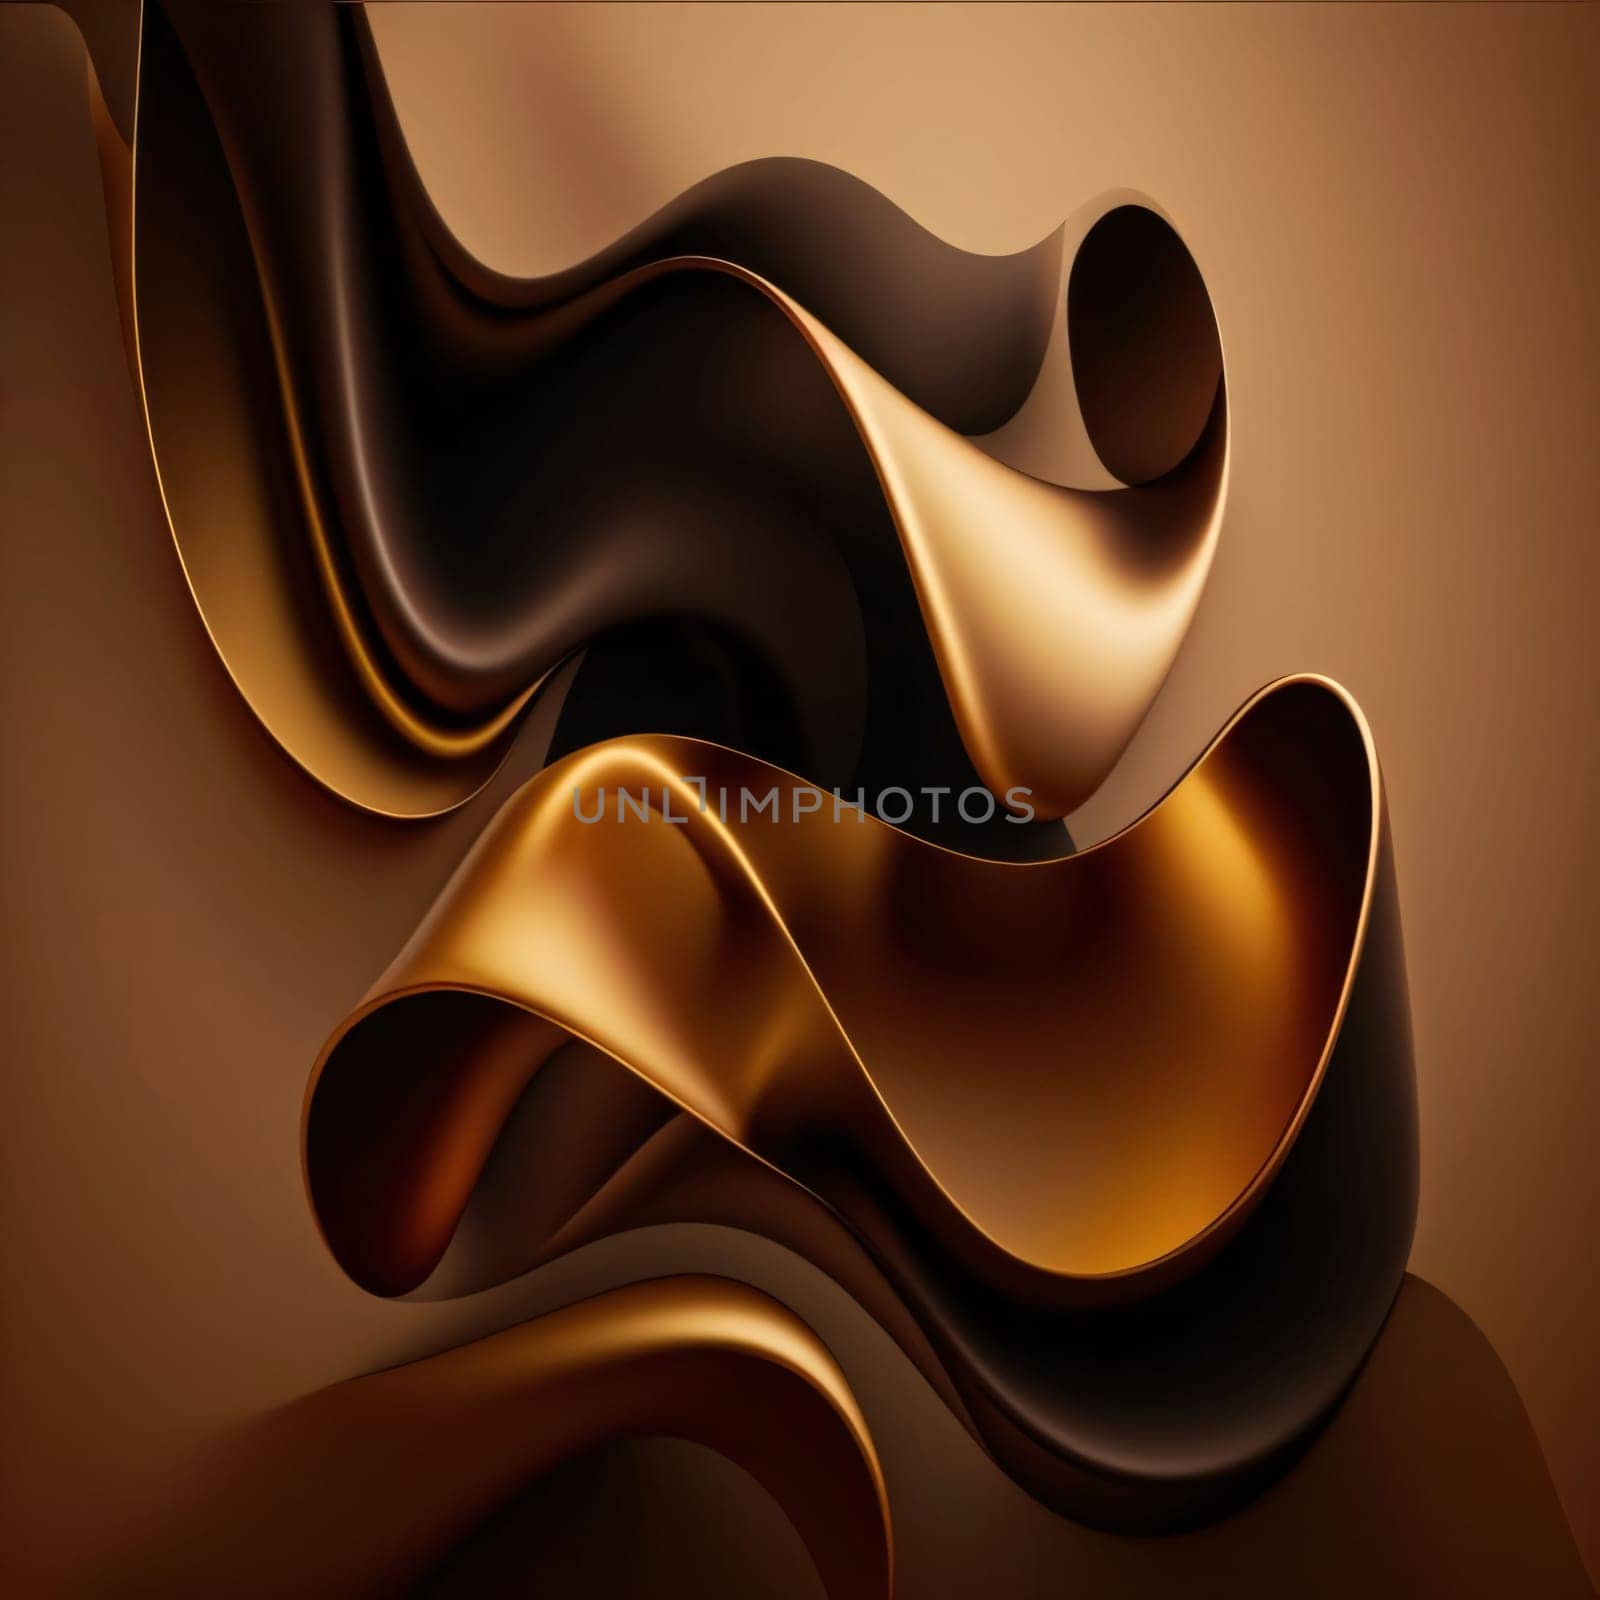 Abstract background design: abstract brown background with smooth wavy silk or satin texture